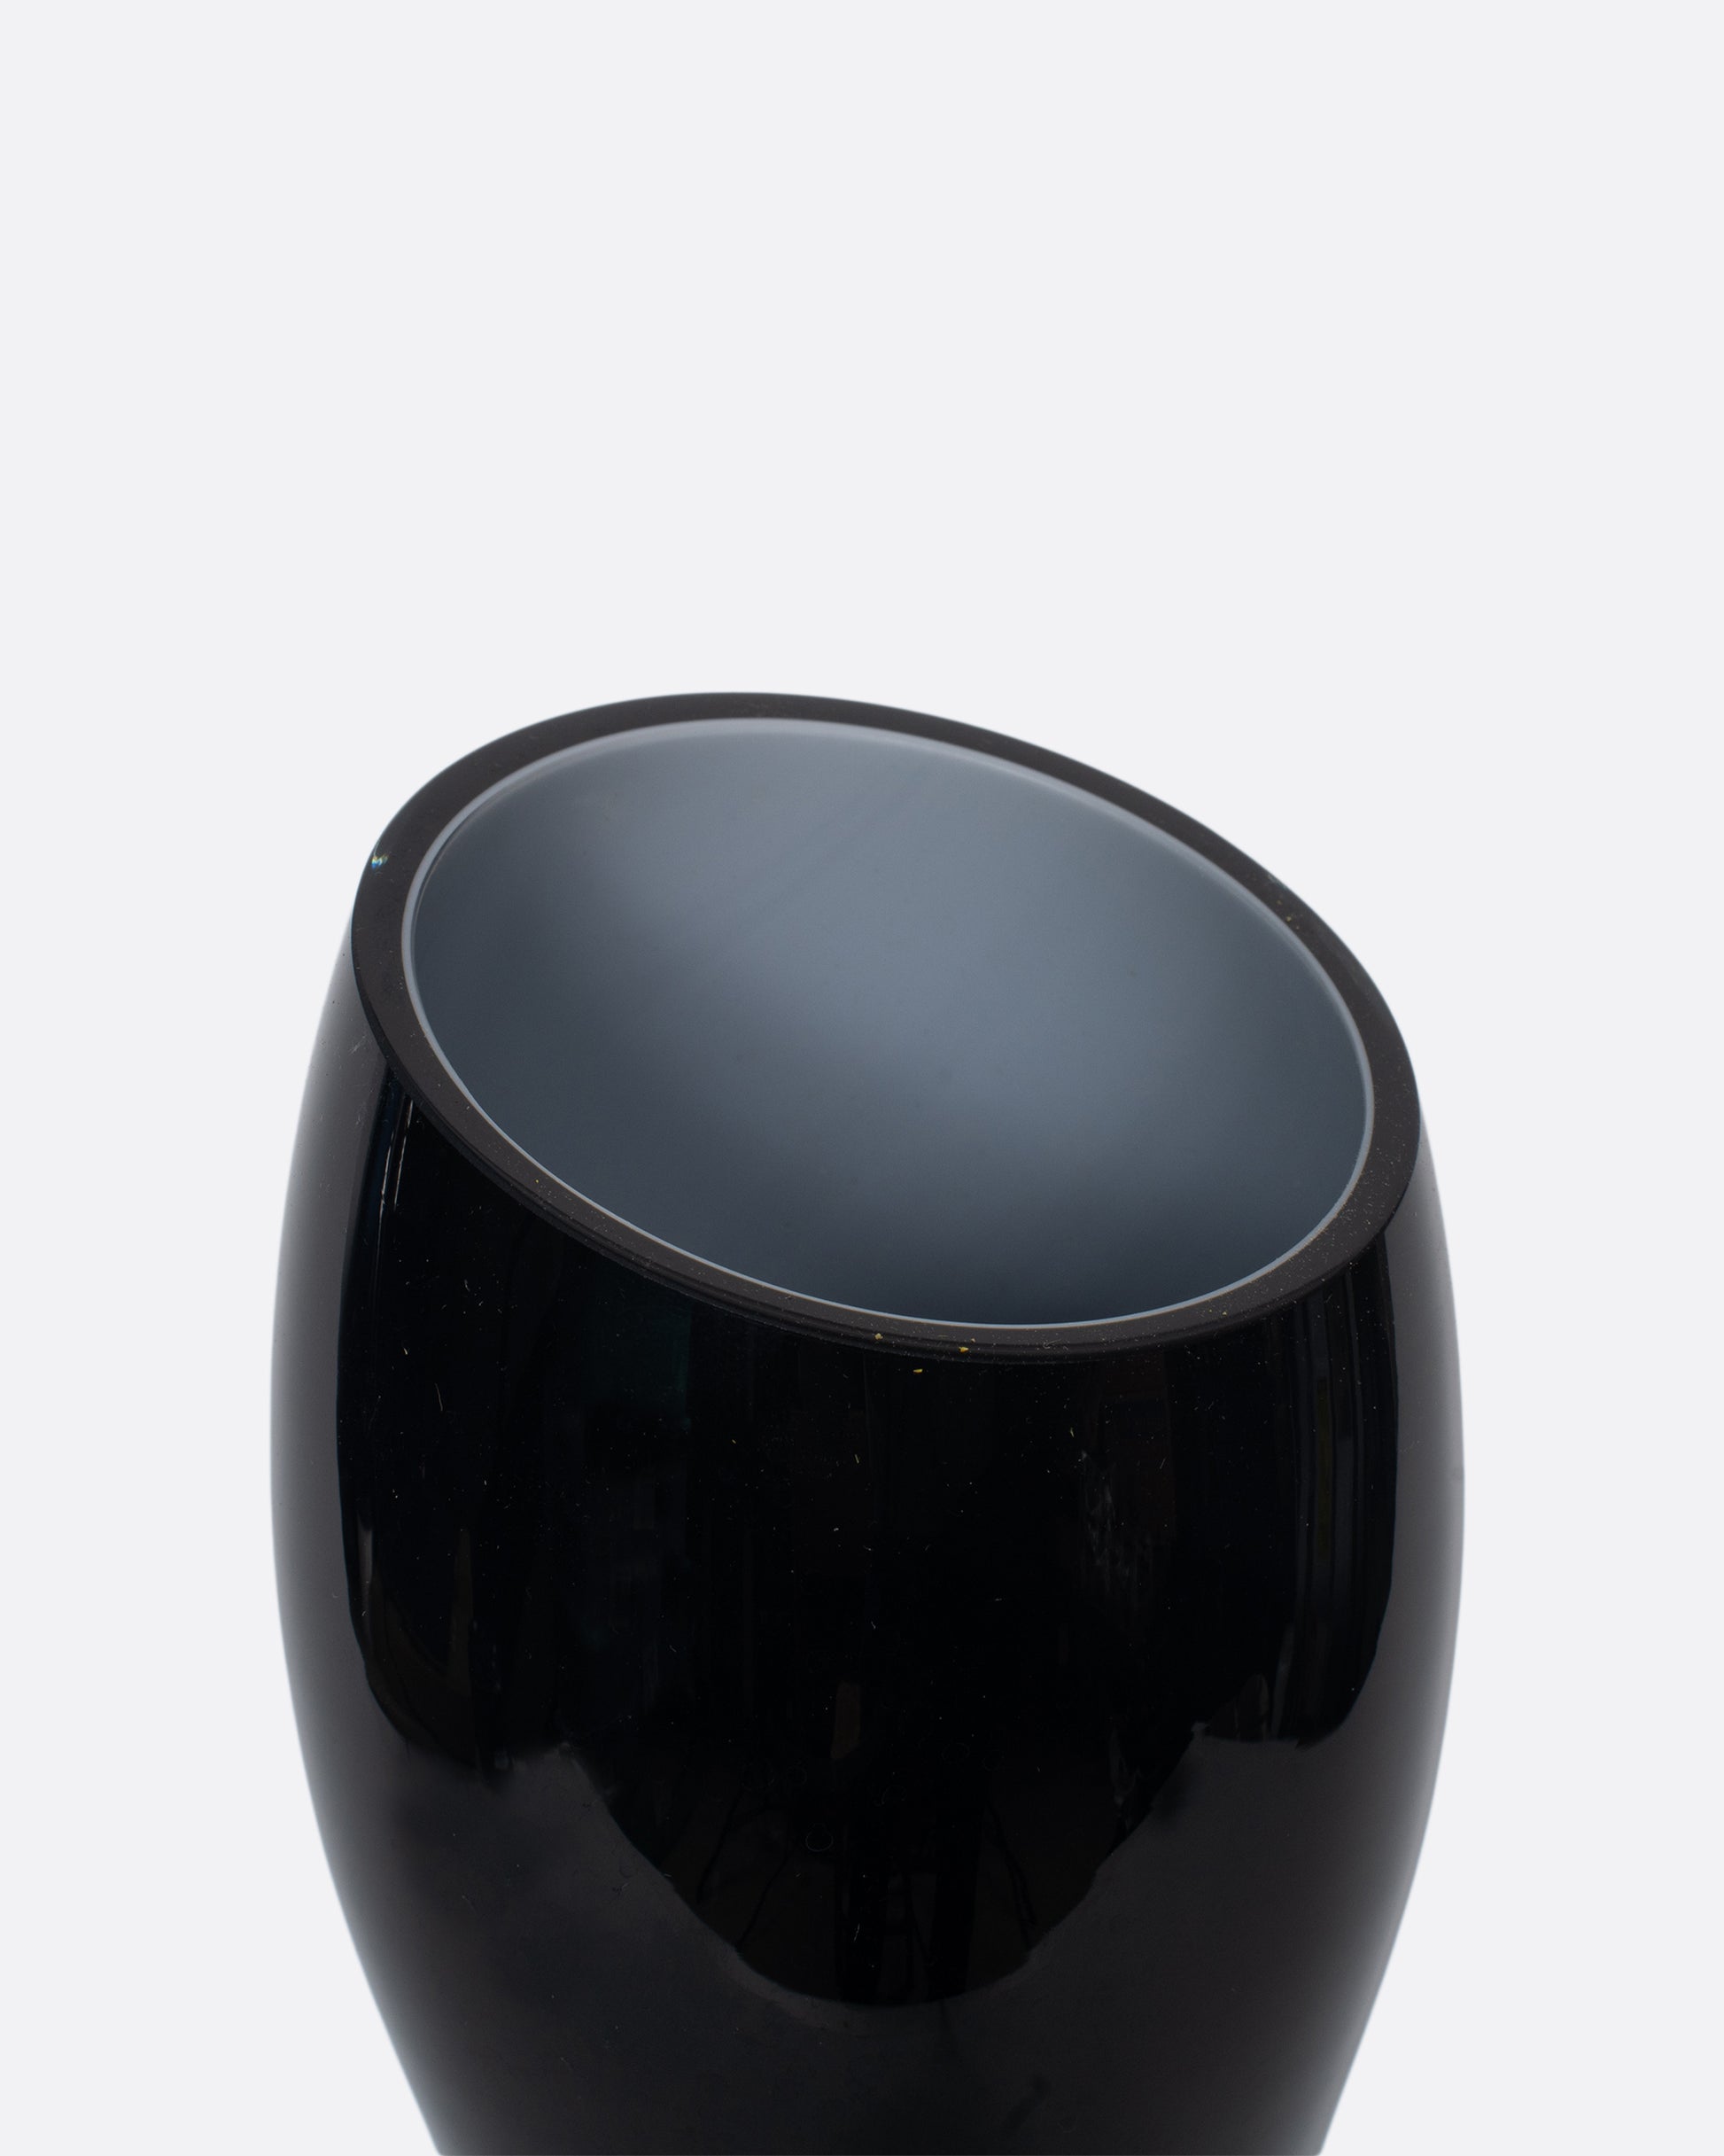 A bold, black cased glass vase with an hourglass figure and a cut slanted top.